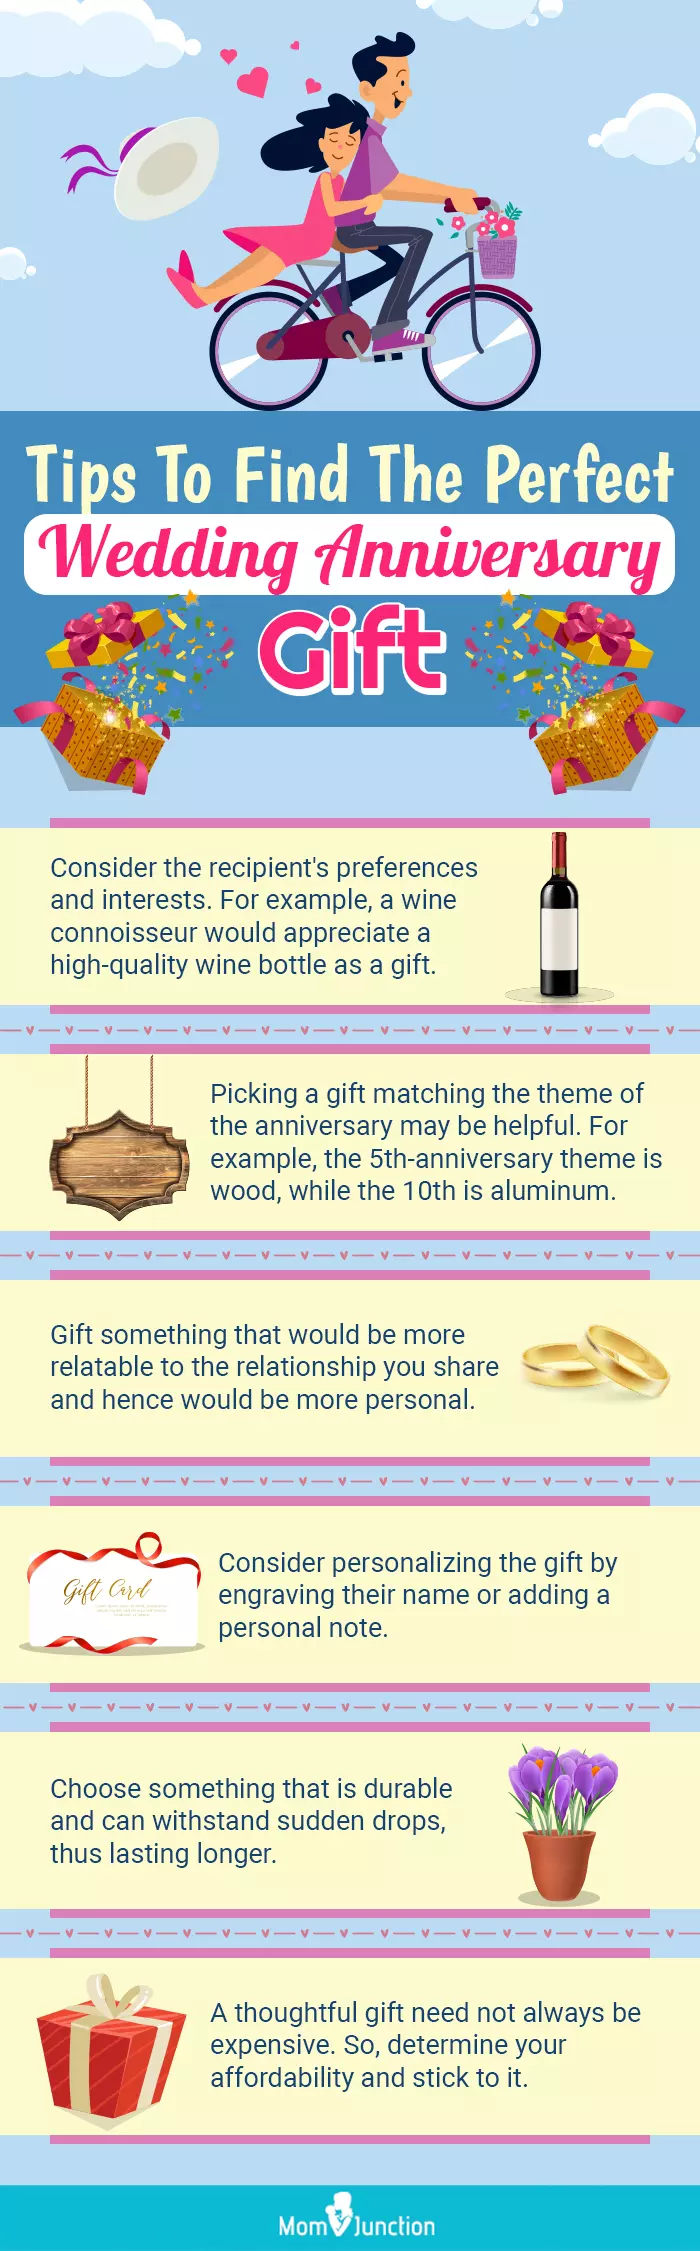 Tips To Find The Perfect Wedding Anniversary Gift (infographic)